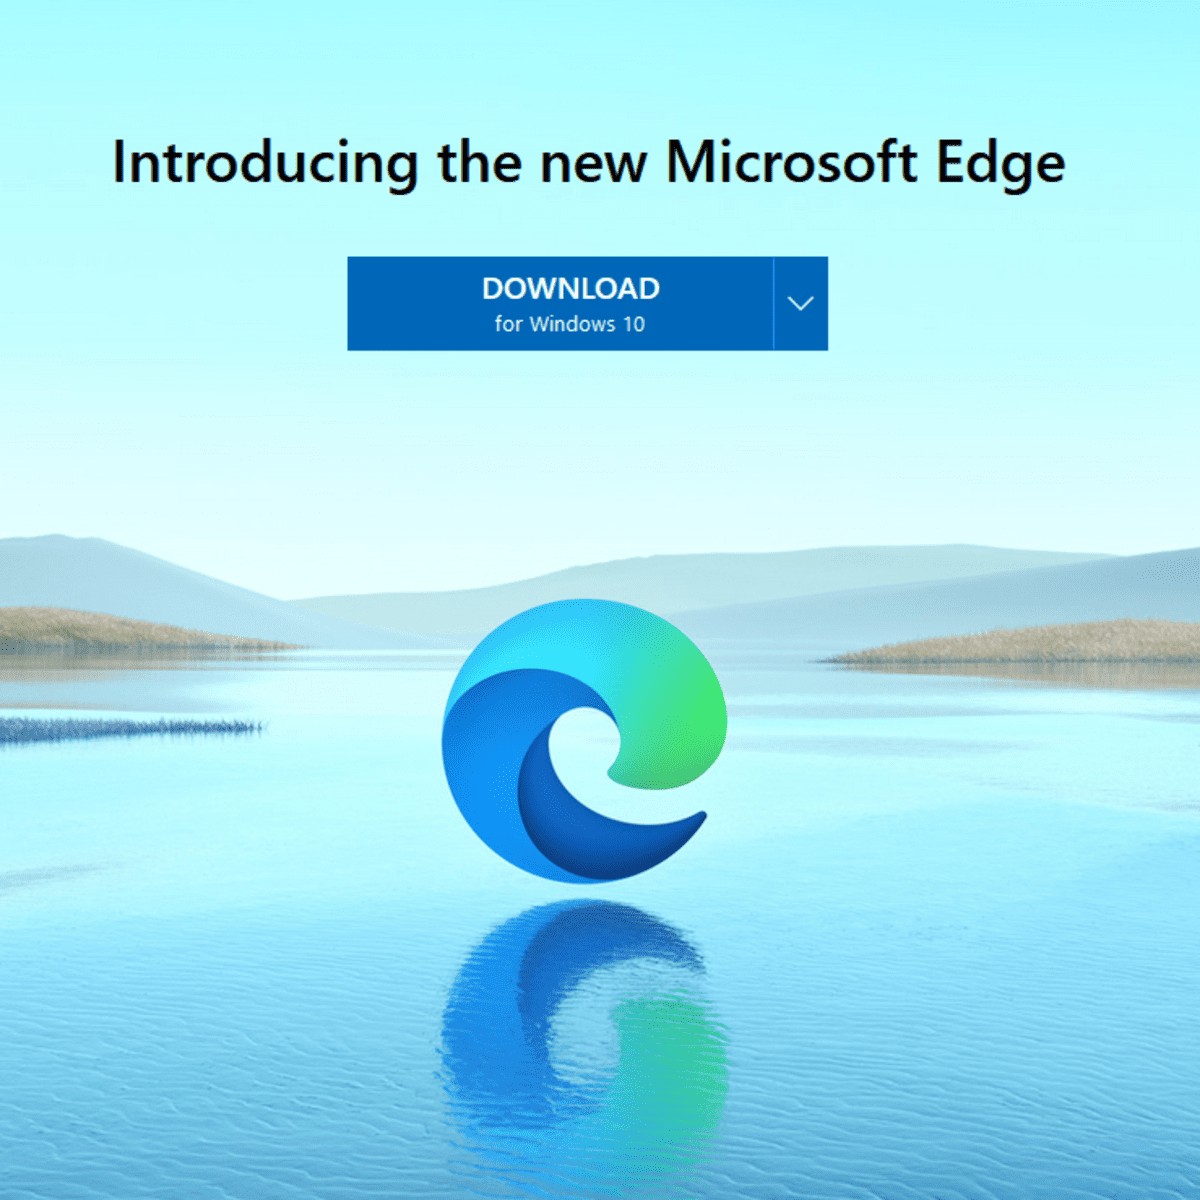 How to Install Google Chrome Extensions in the Microsoft Edge Browser 